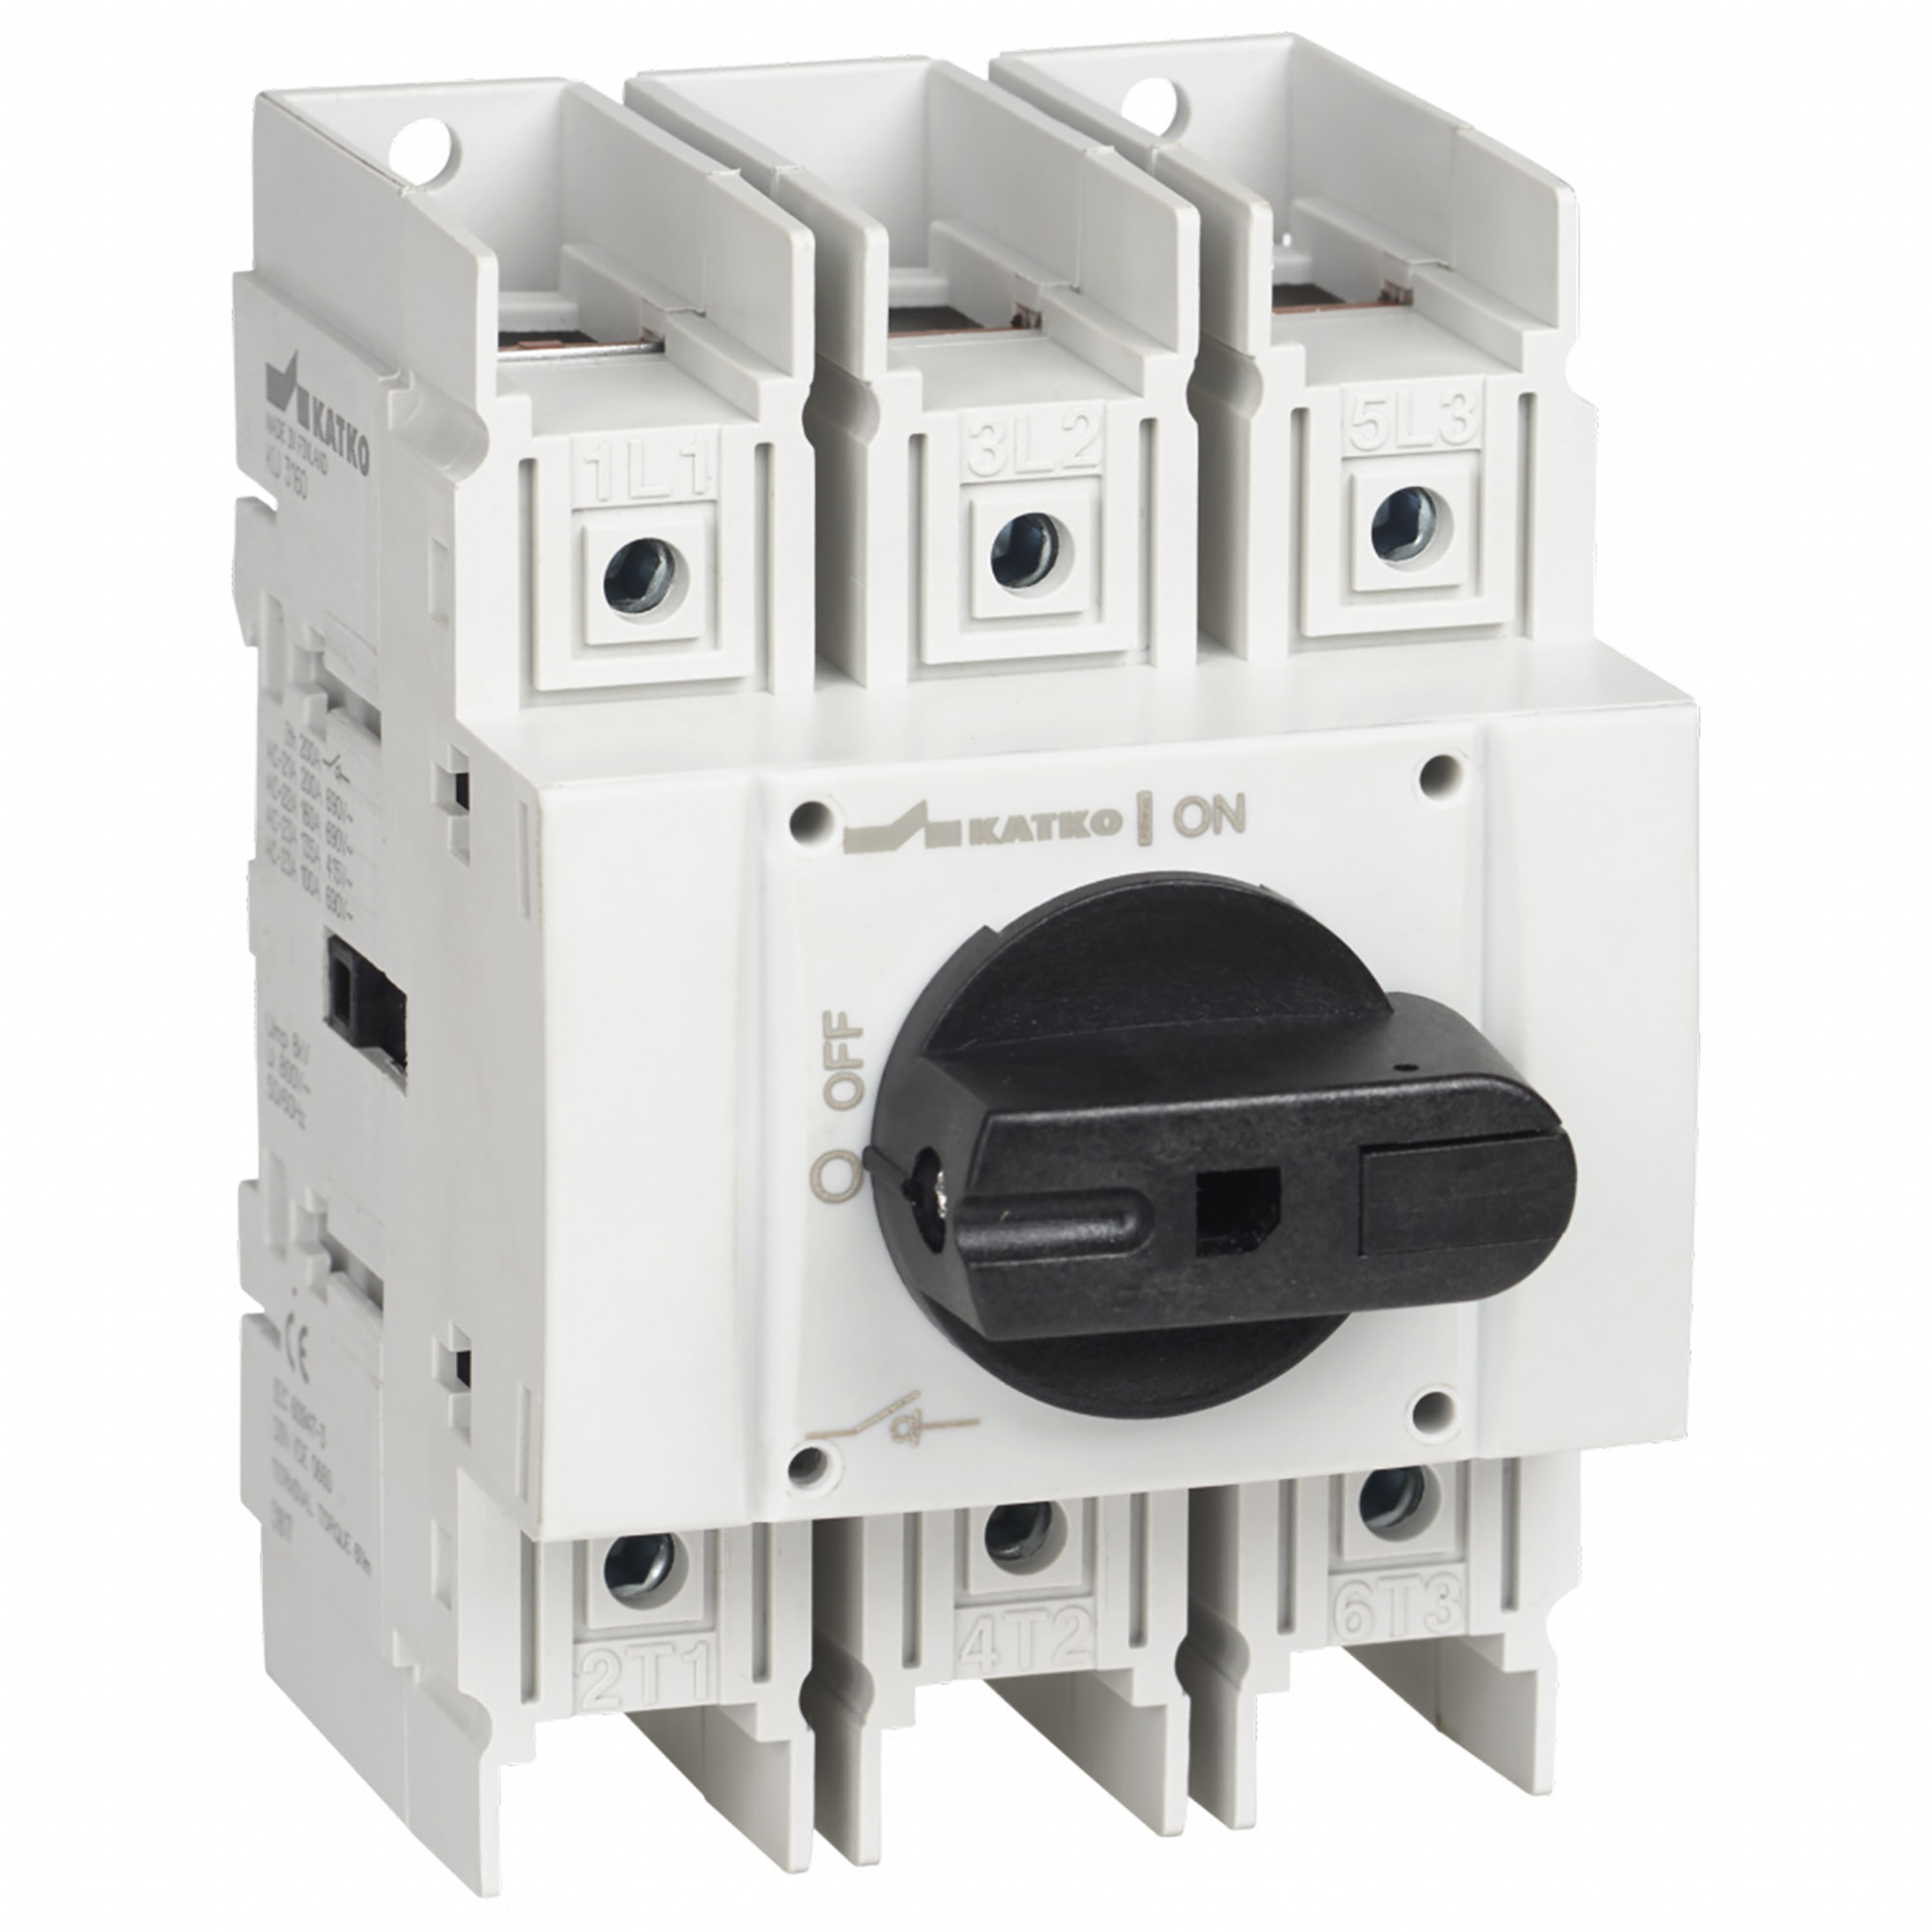 62-KU 3100 KU 16-160A 3- and 4-pole IN/OUT, compact, suitable for DIN-EN rail. The 4-pole version is also available with early-make and late-break neutral pole. The silver contactsensures safe and durable operation. Series KU modular design.